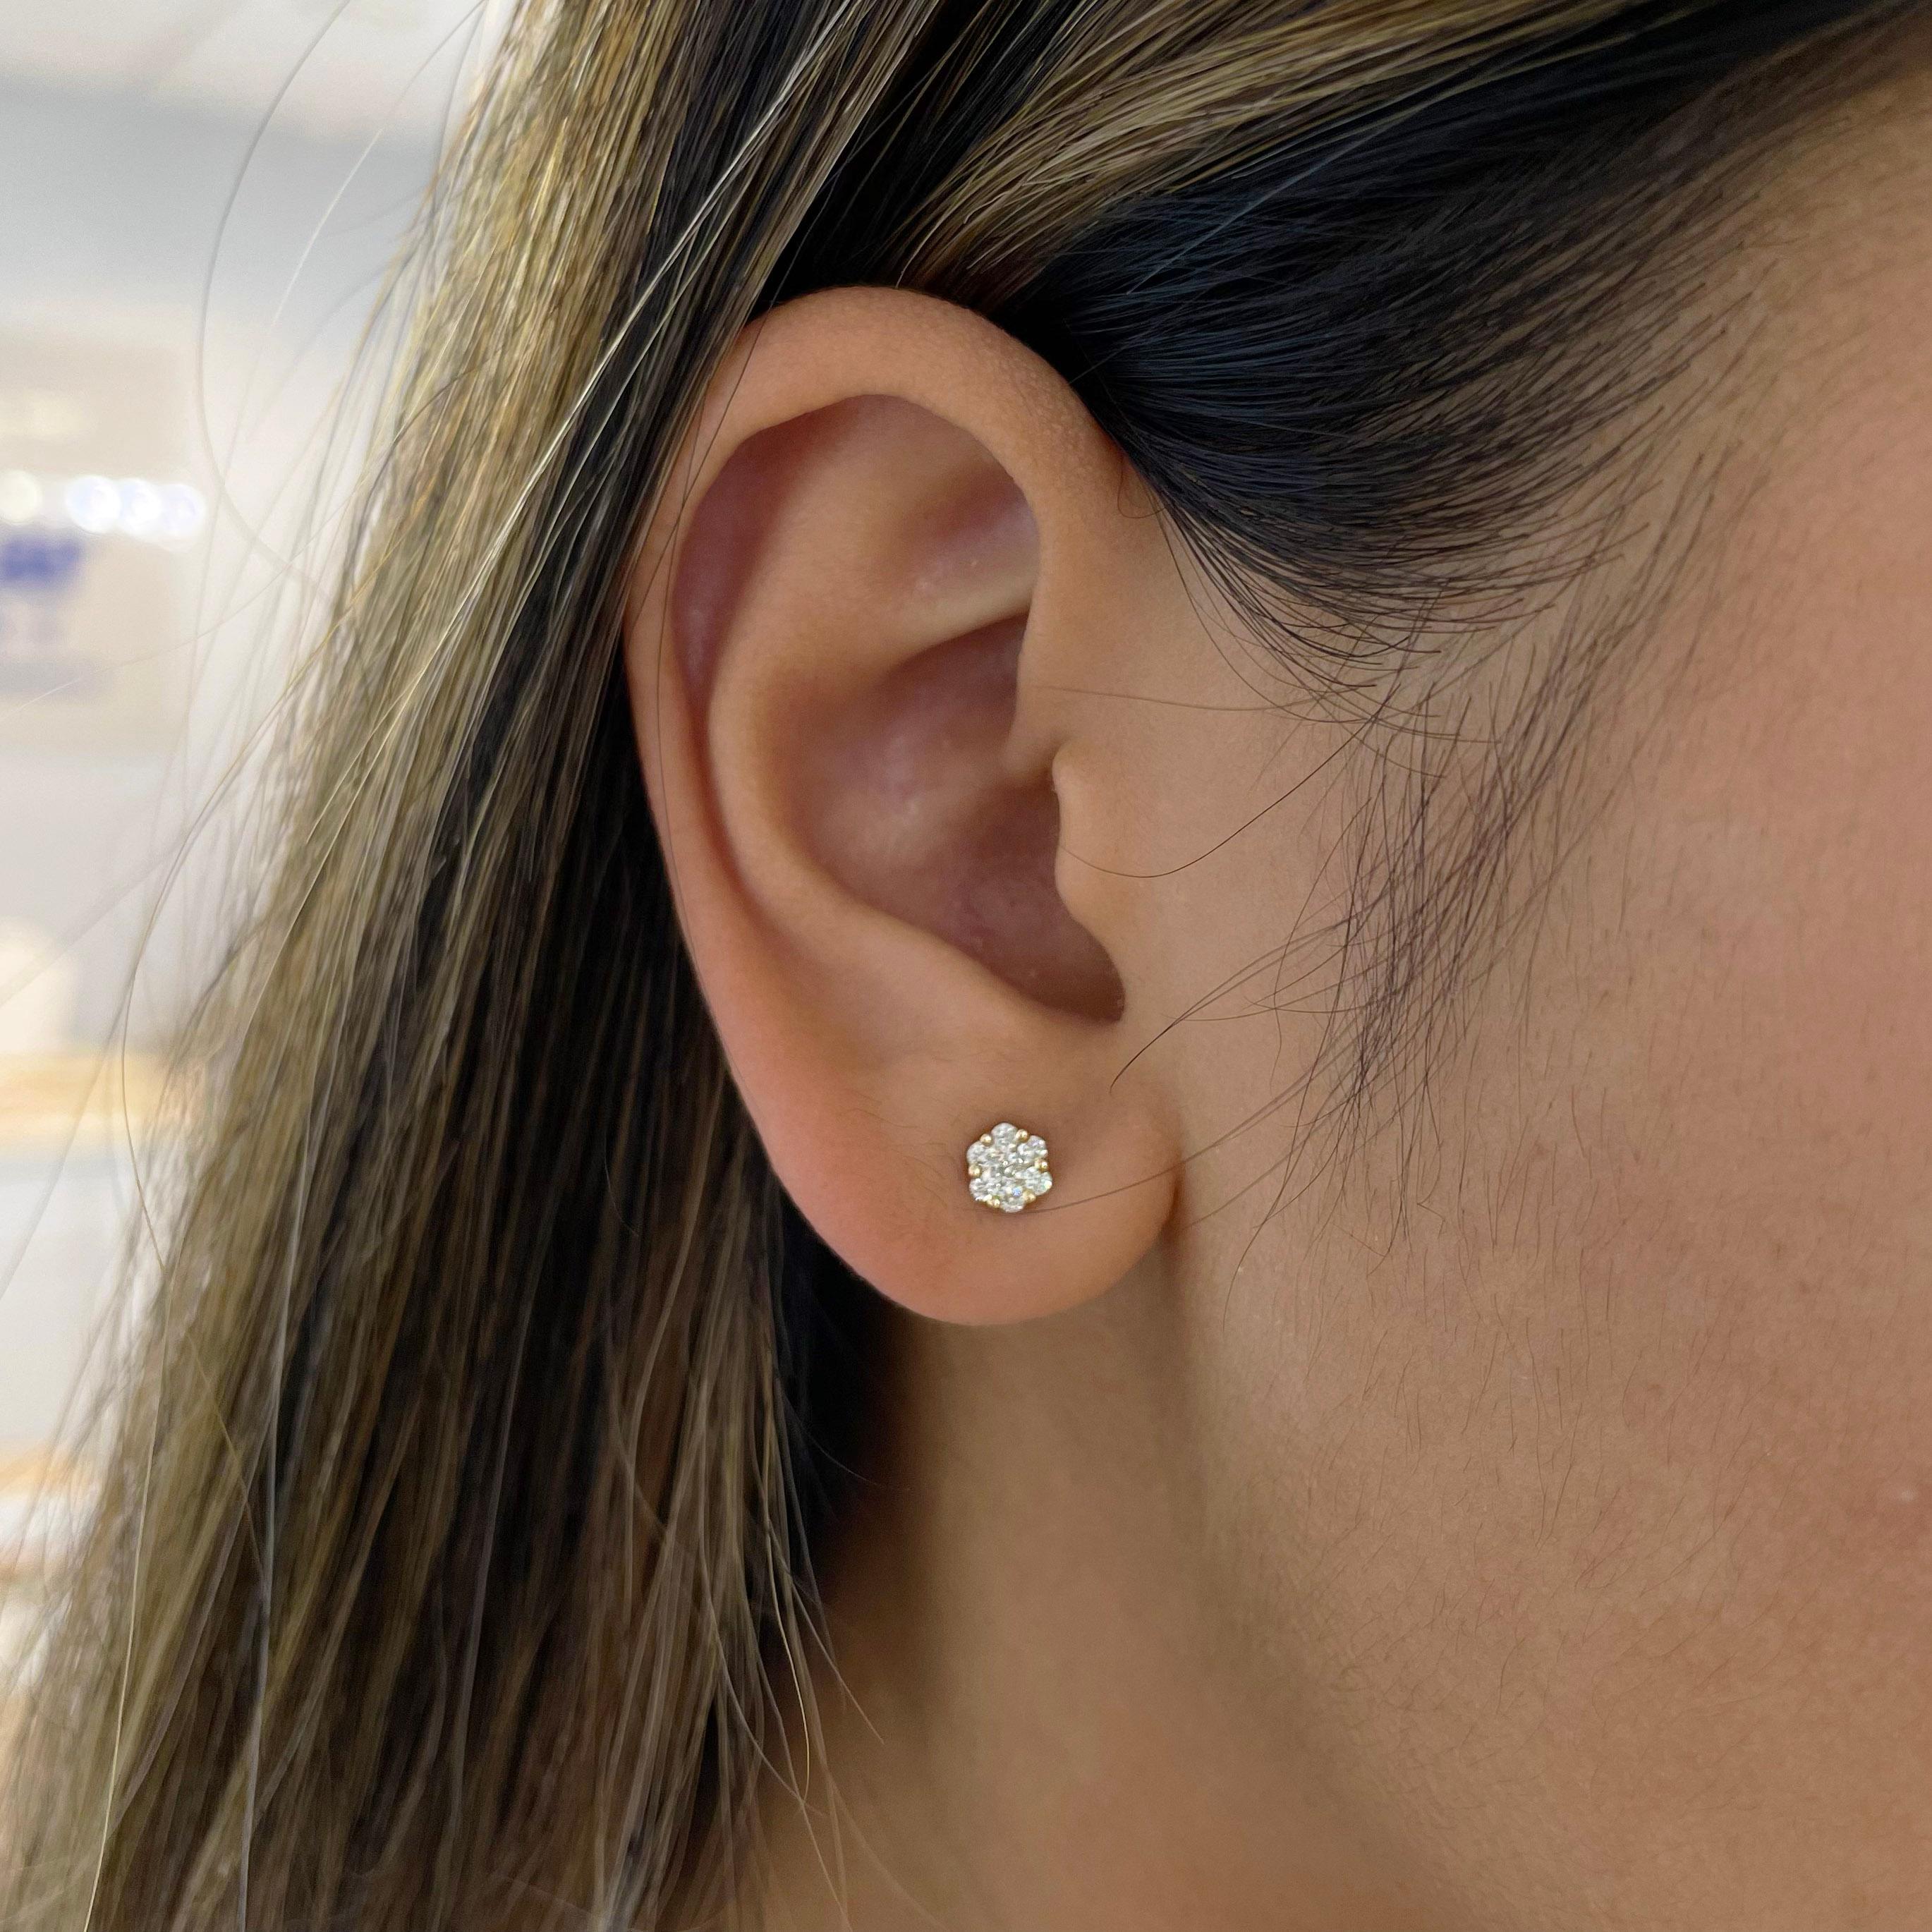 Simple diamond stud earrings make the best addition to any jewelry collection. Especially at our new low price the delicate design makes the perfect gift for yourself, a family member, or a significant other. The details for these gorgeous earrings